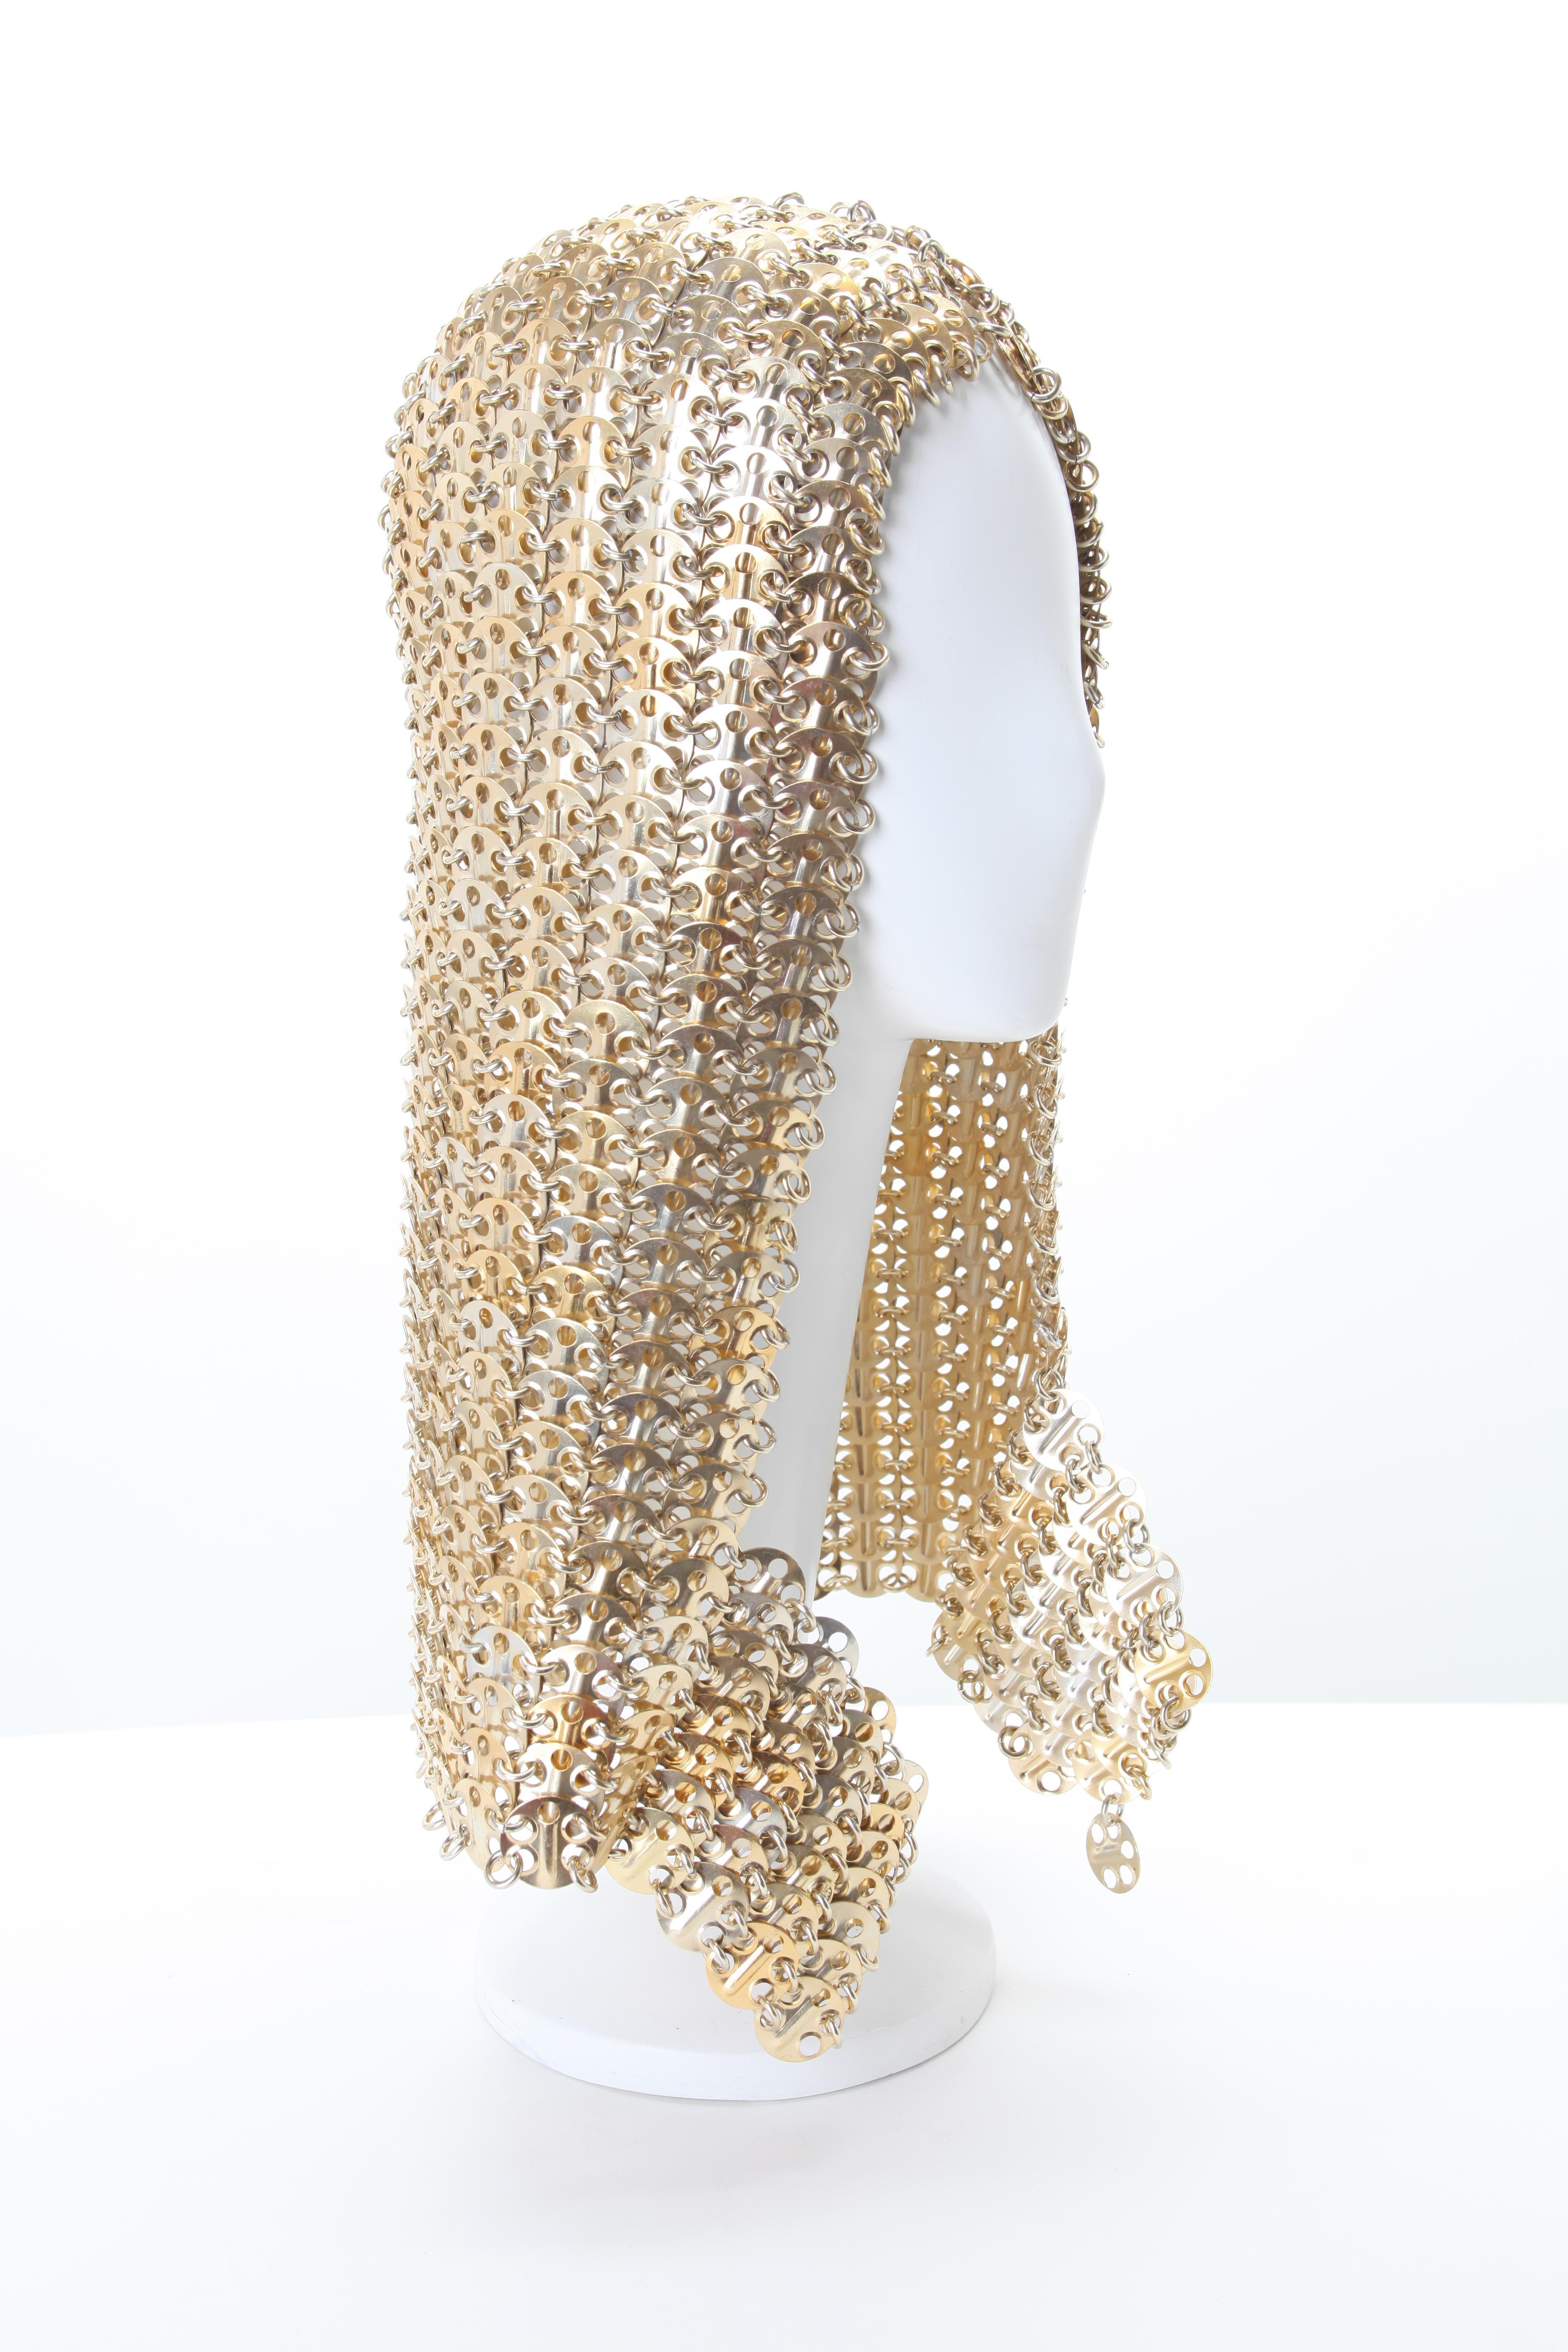 Paco Rabanne Chainmail Hood Rare c 1960s; Worn by Lizzo for the cover of Billboard Magazine